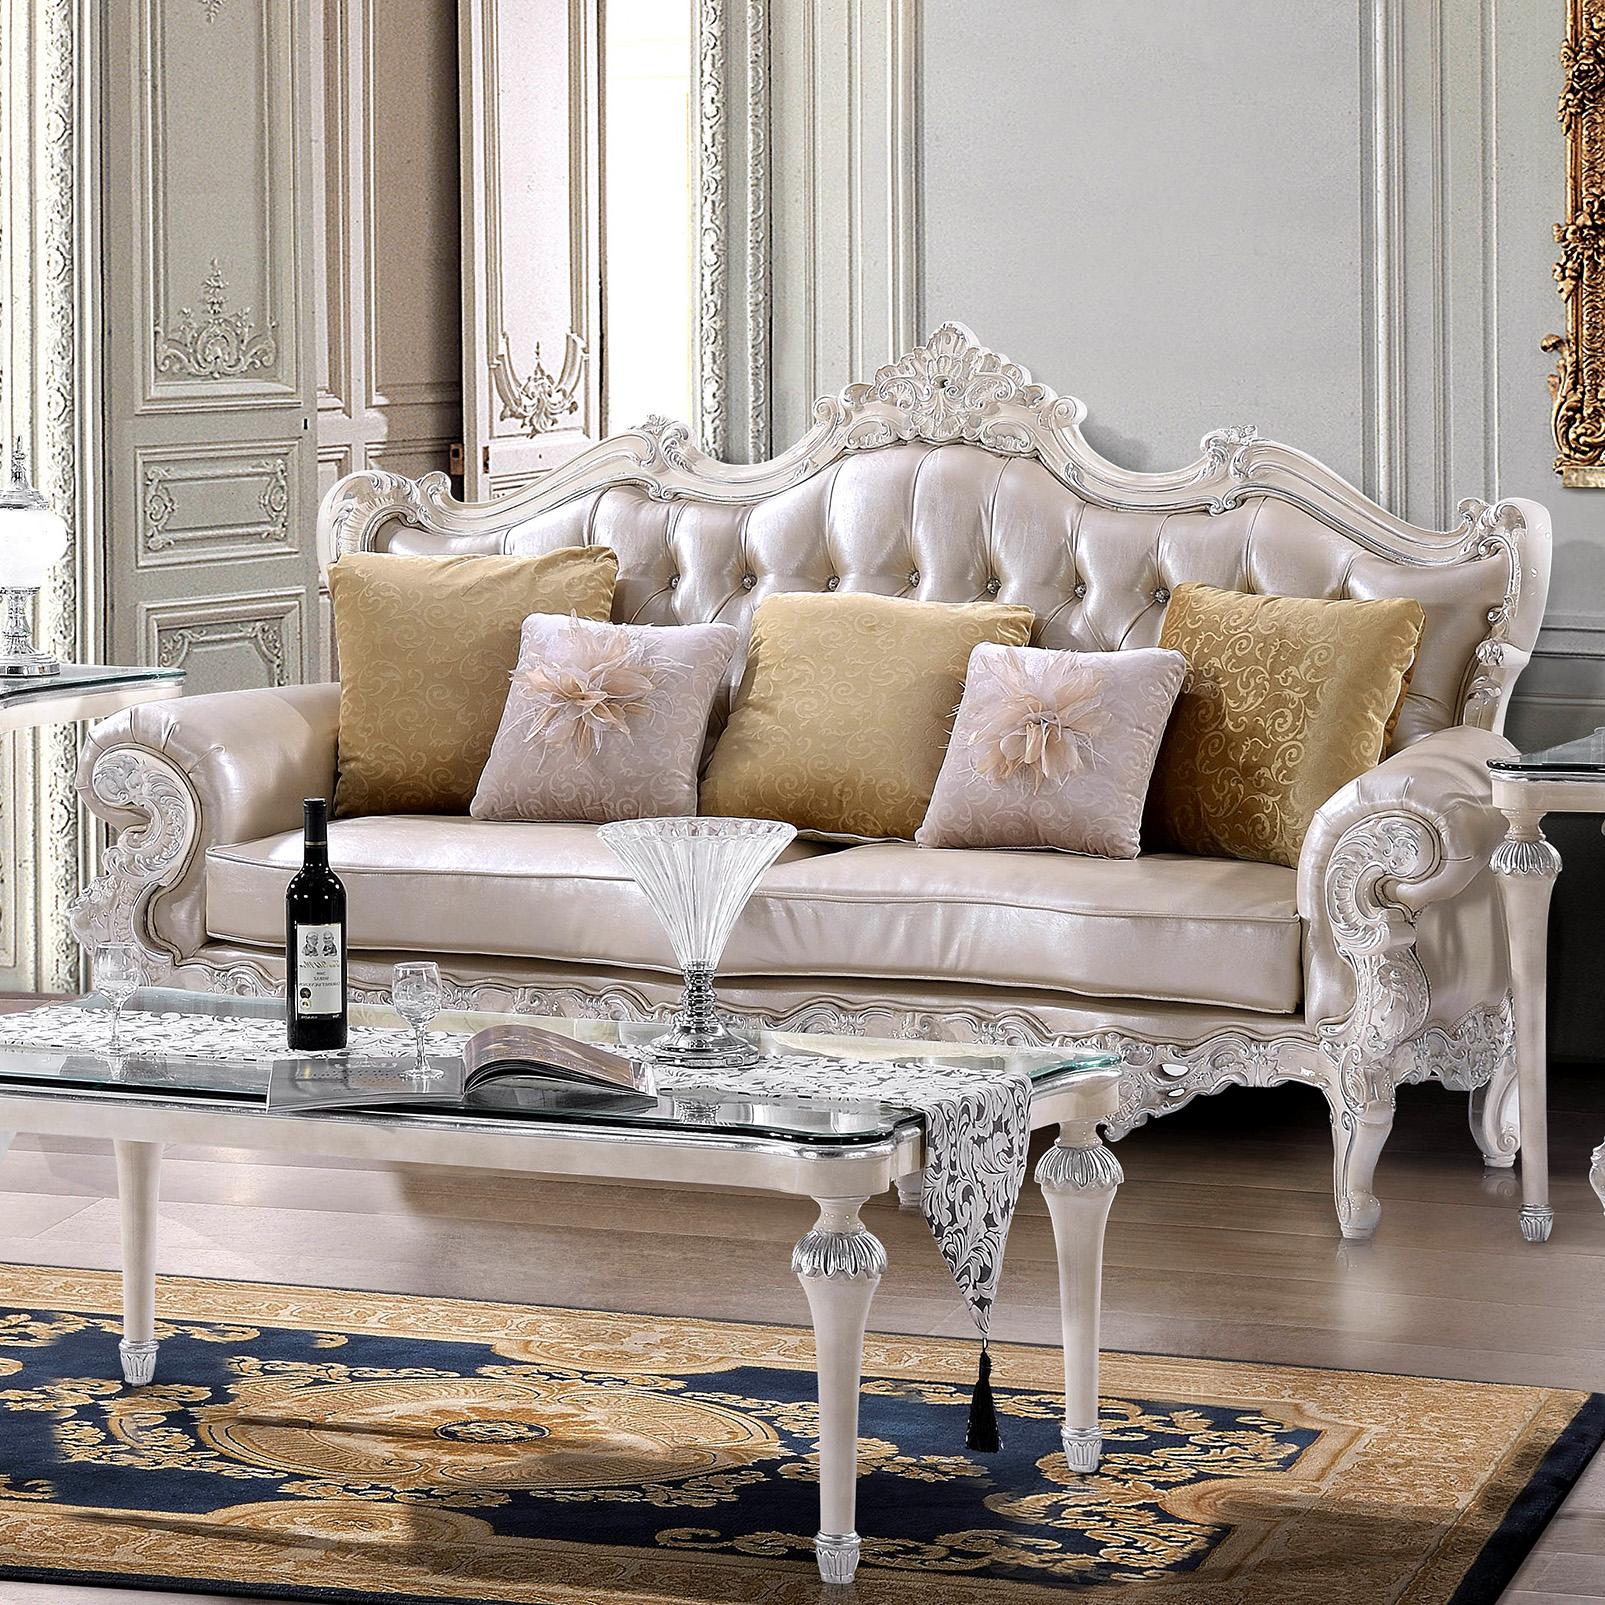 

    
Luxury Pearl Cream Tufted Sofa Carved Wood Traditional Homey Design HD-13009
